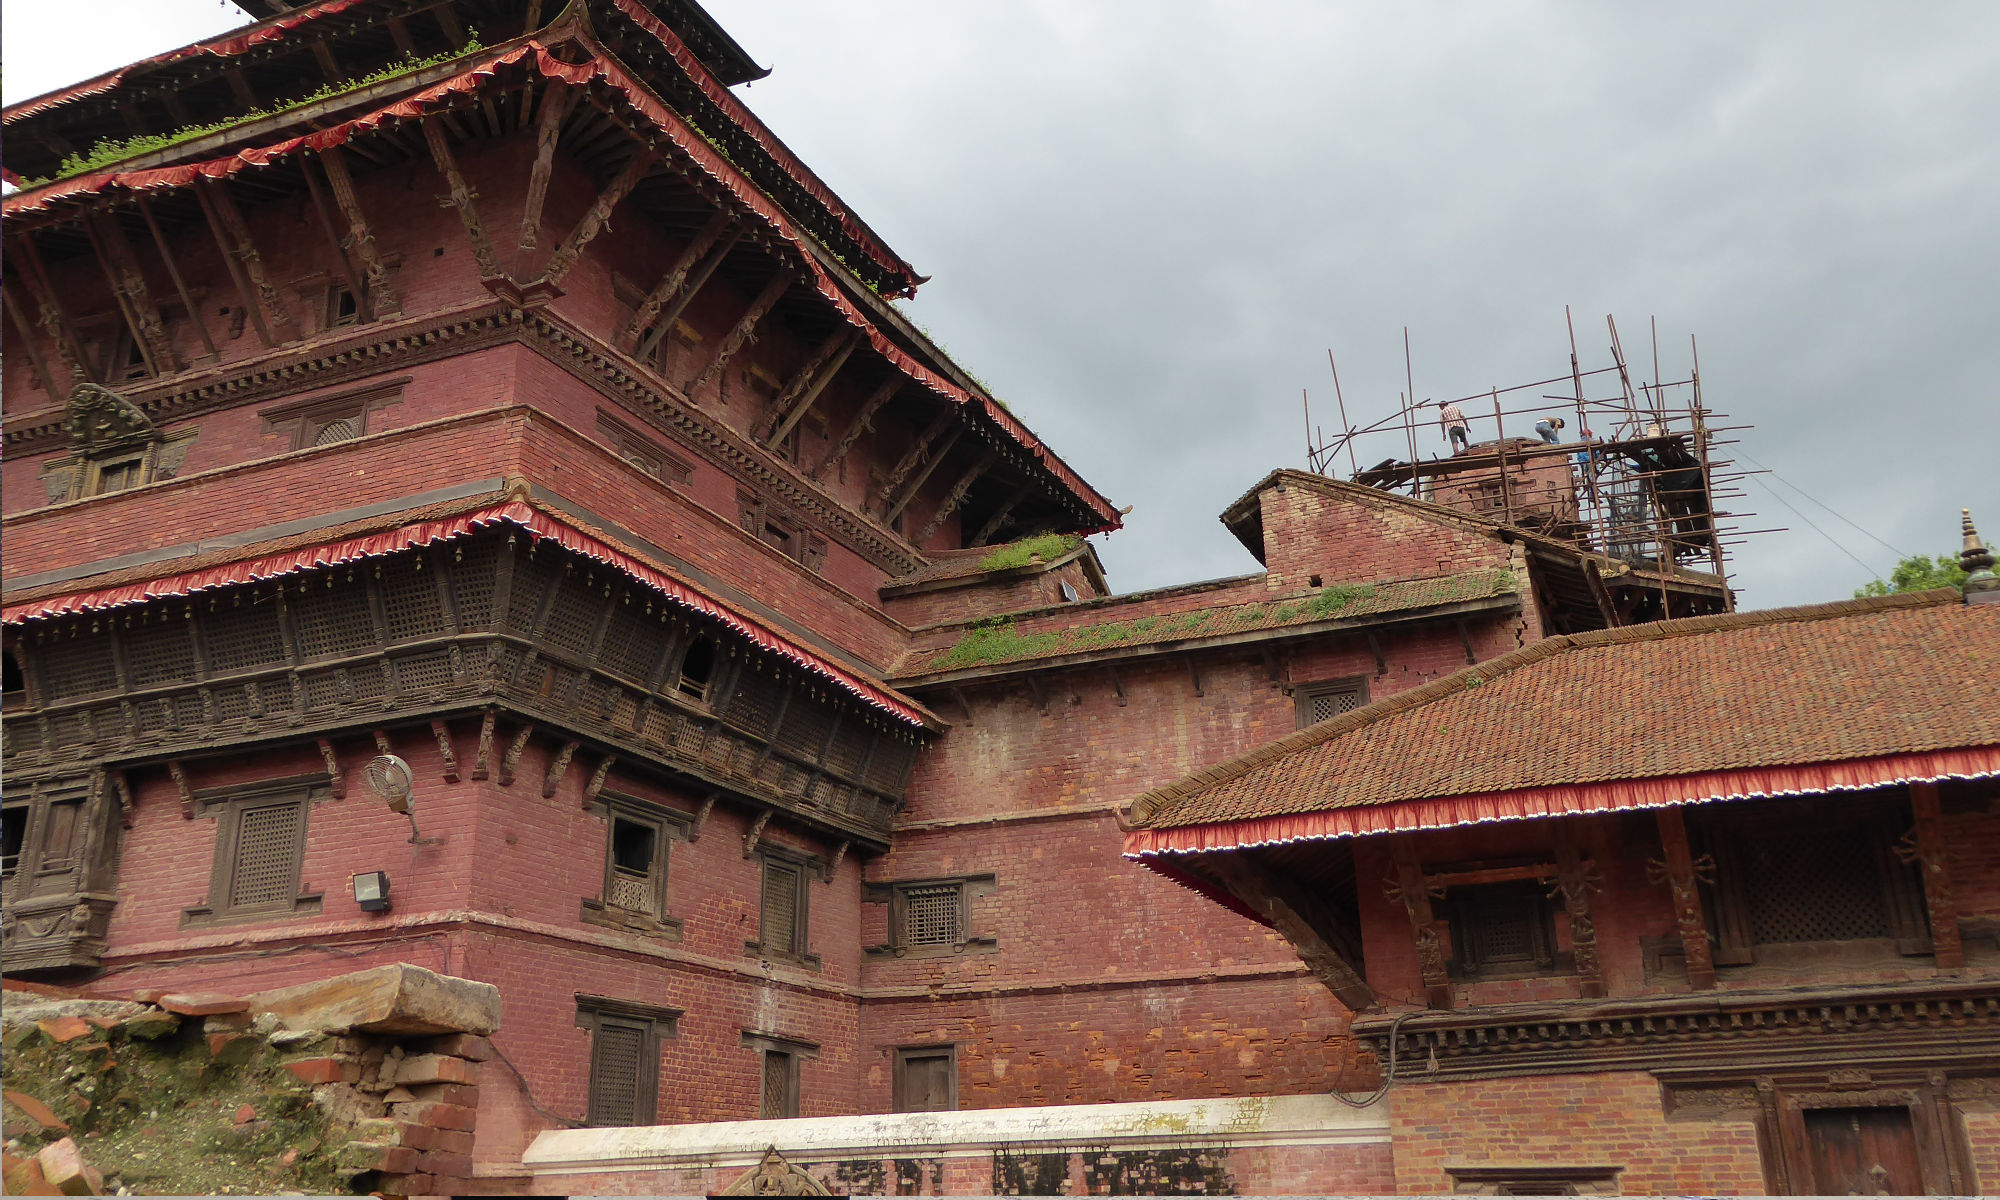 Worked continue to rebuild temples in Patan. Much of the world's media focused on the damaged and destroyed cultural heritage sites after the earthquake, giving a sense of blanket devastation across Nepal.